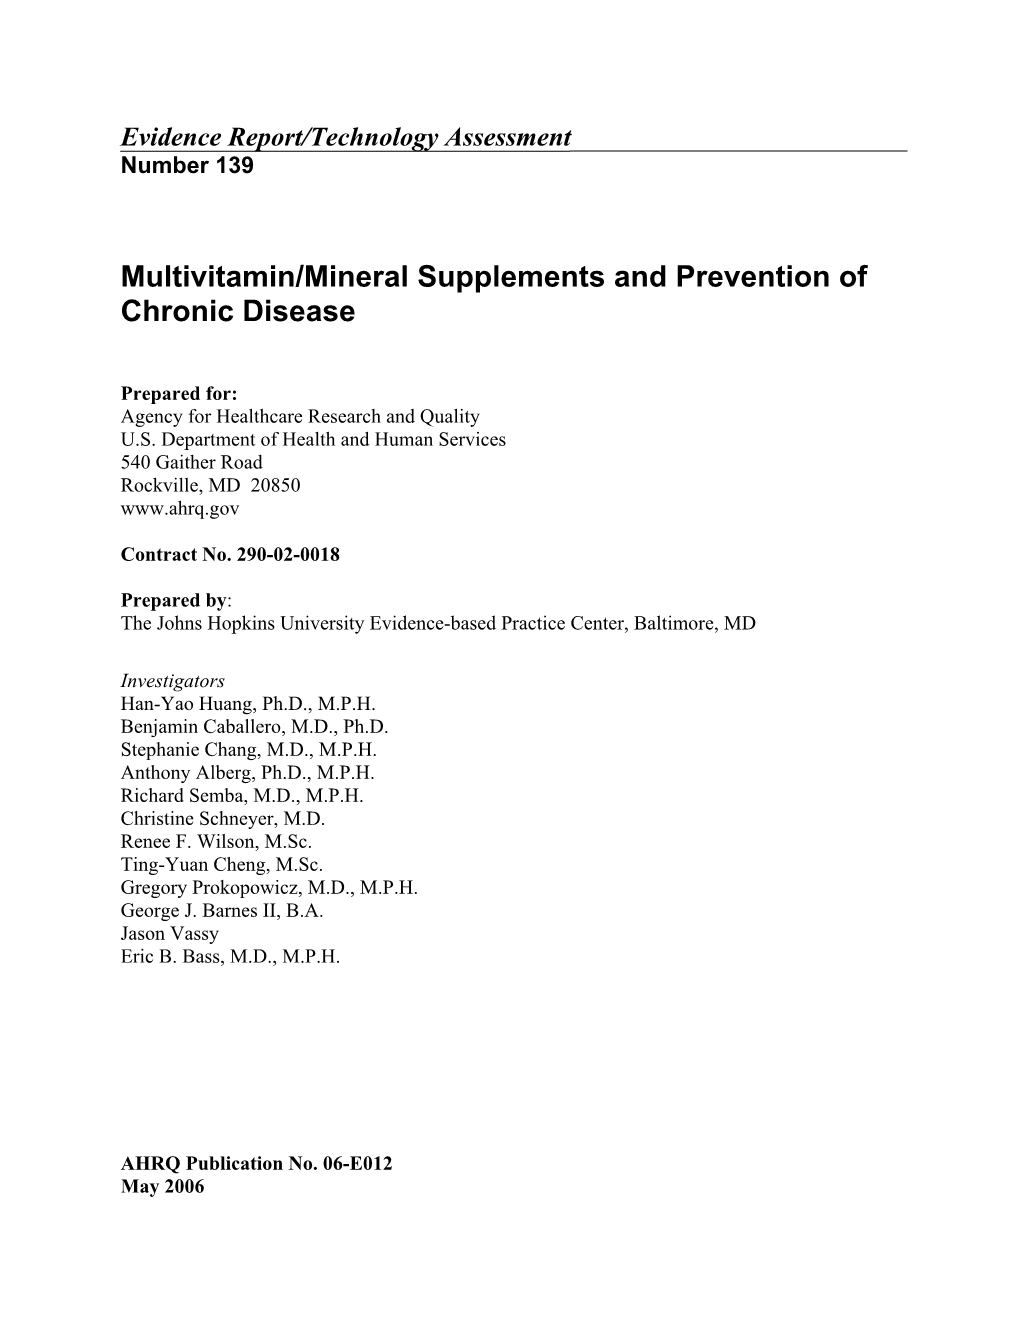 Multivitamin/Mineral Supplements and Prevention of Chronic Disease